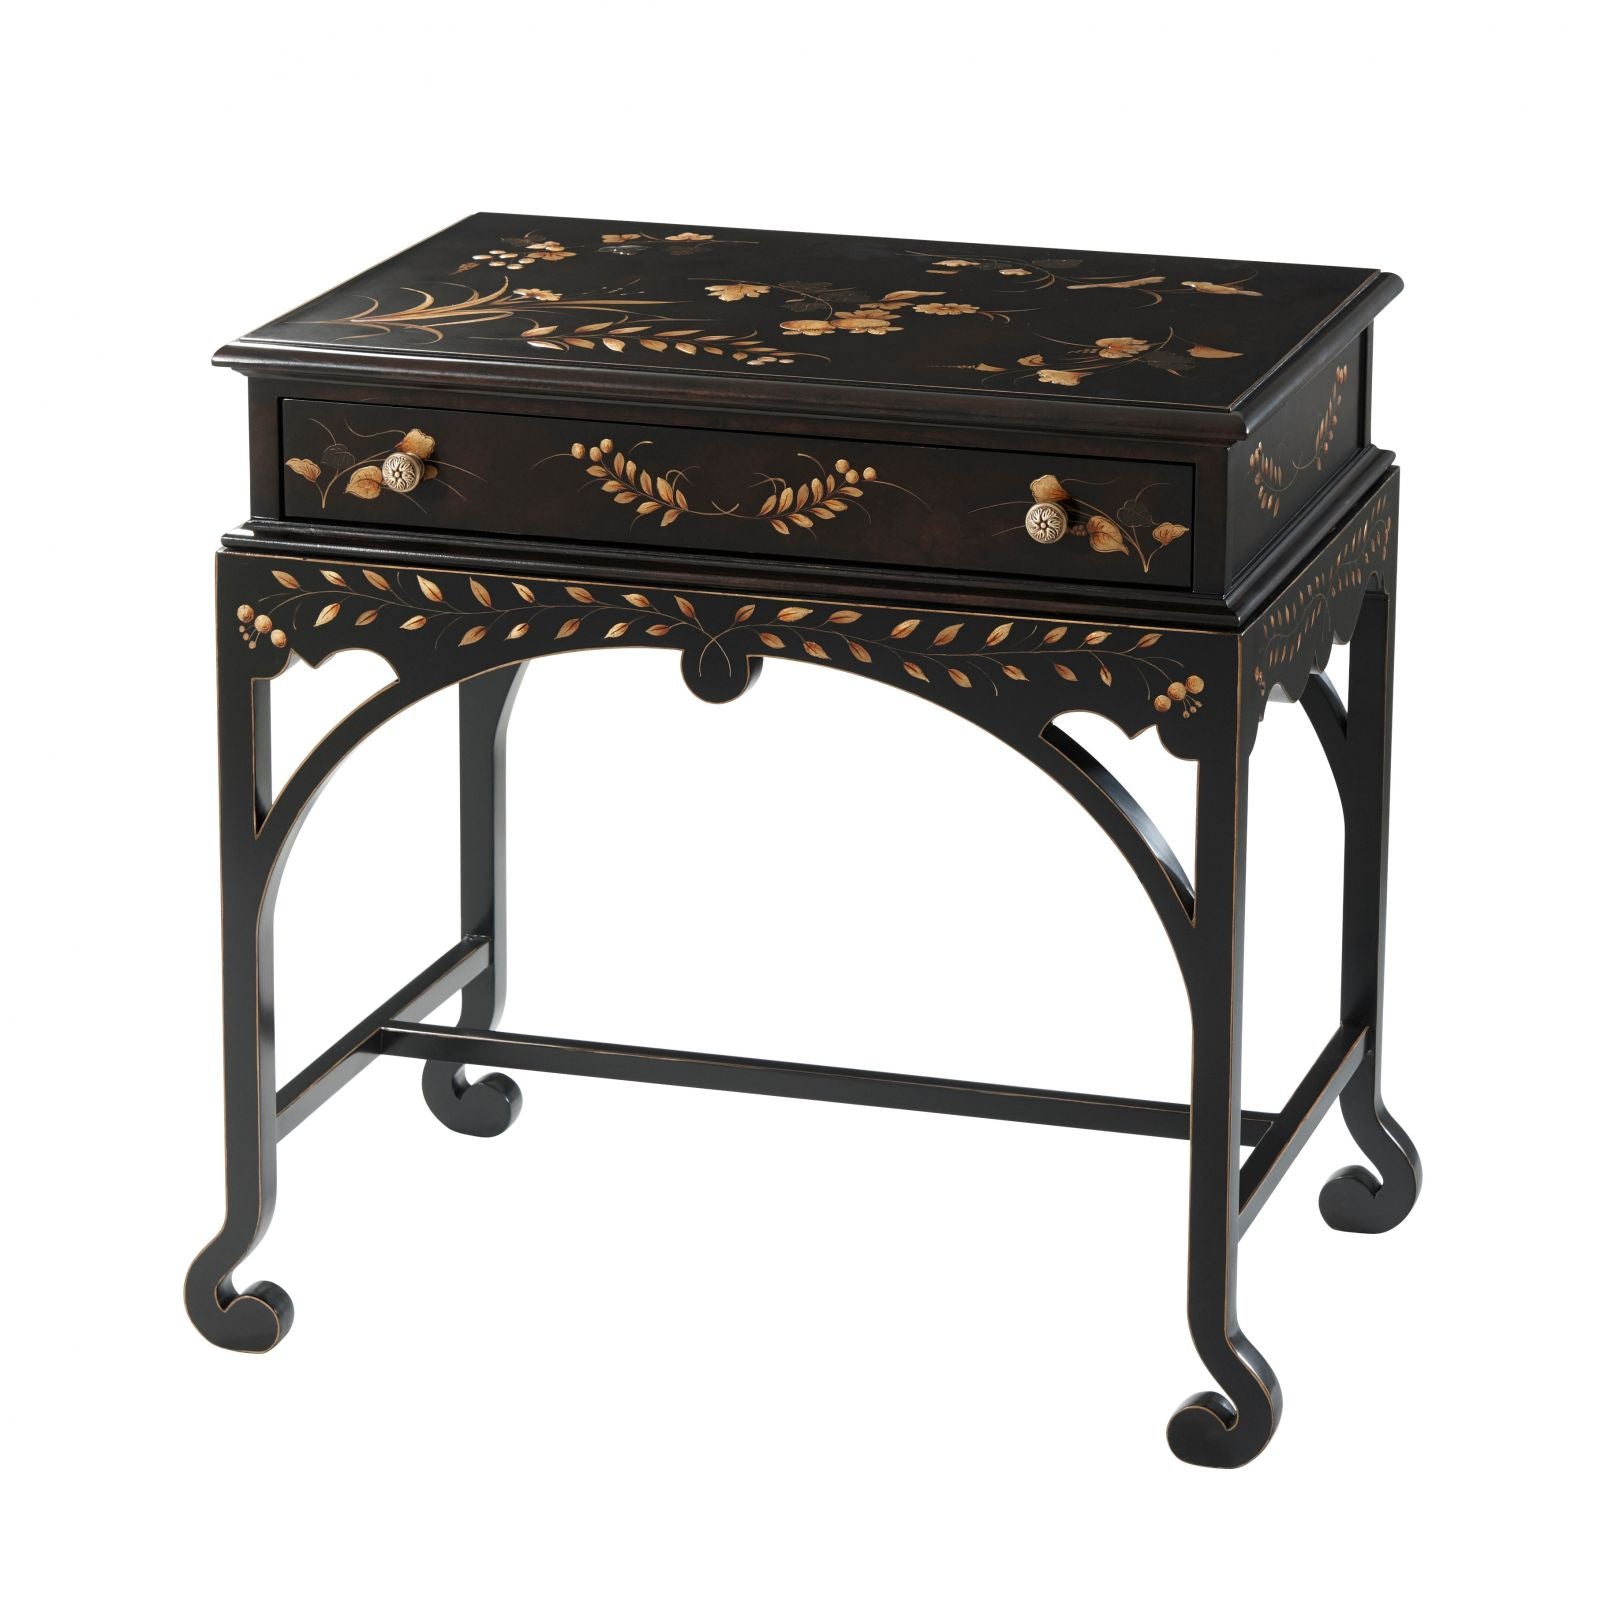 William and Mary 18th-century style side table